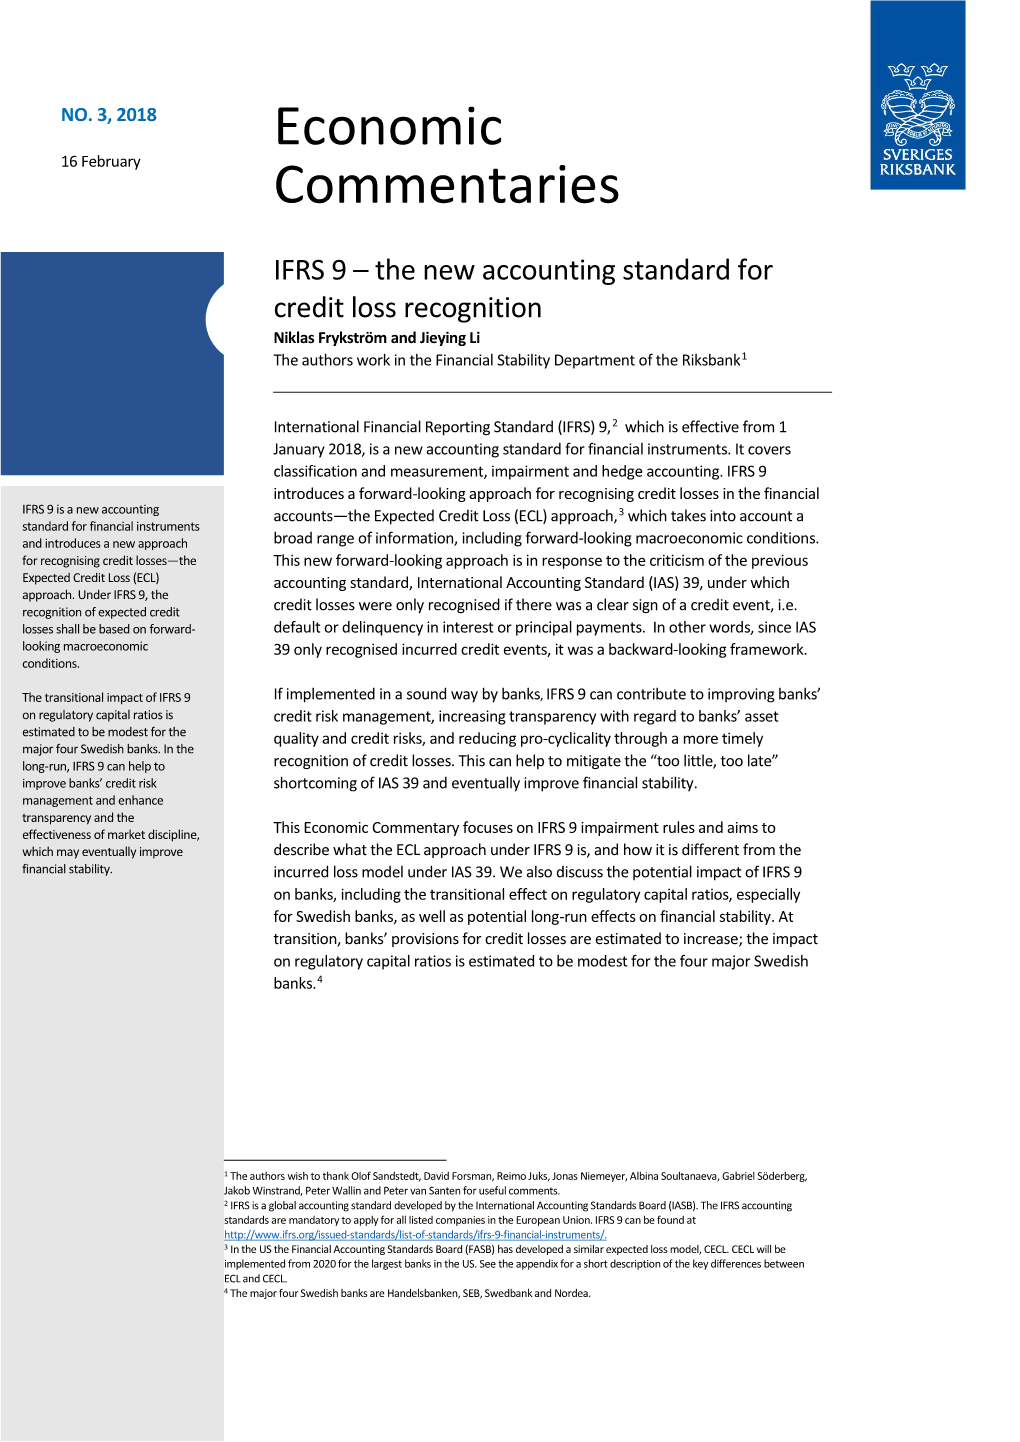 IFRS 9 – the New Accounting Standard for Credit Loss Recognition